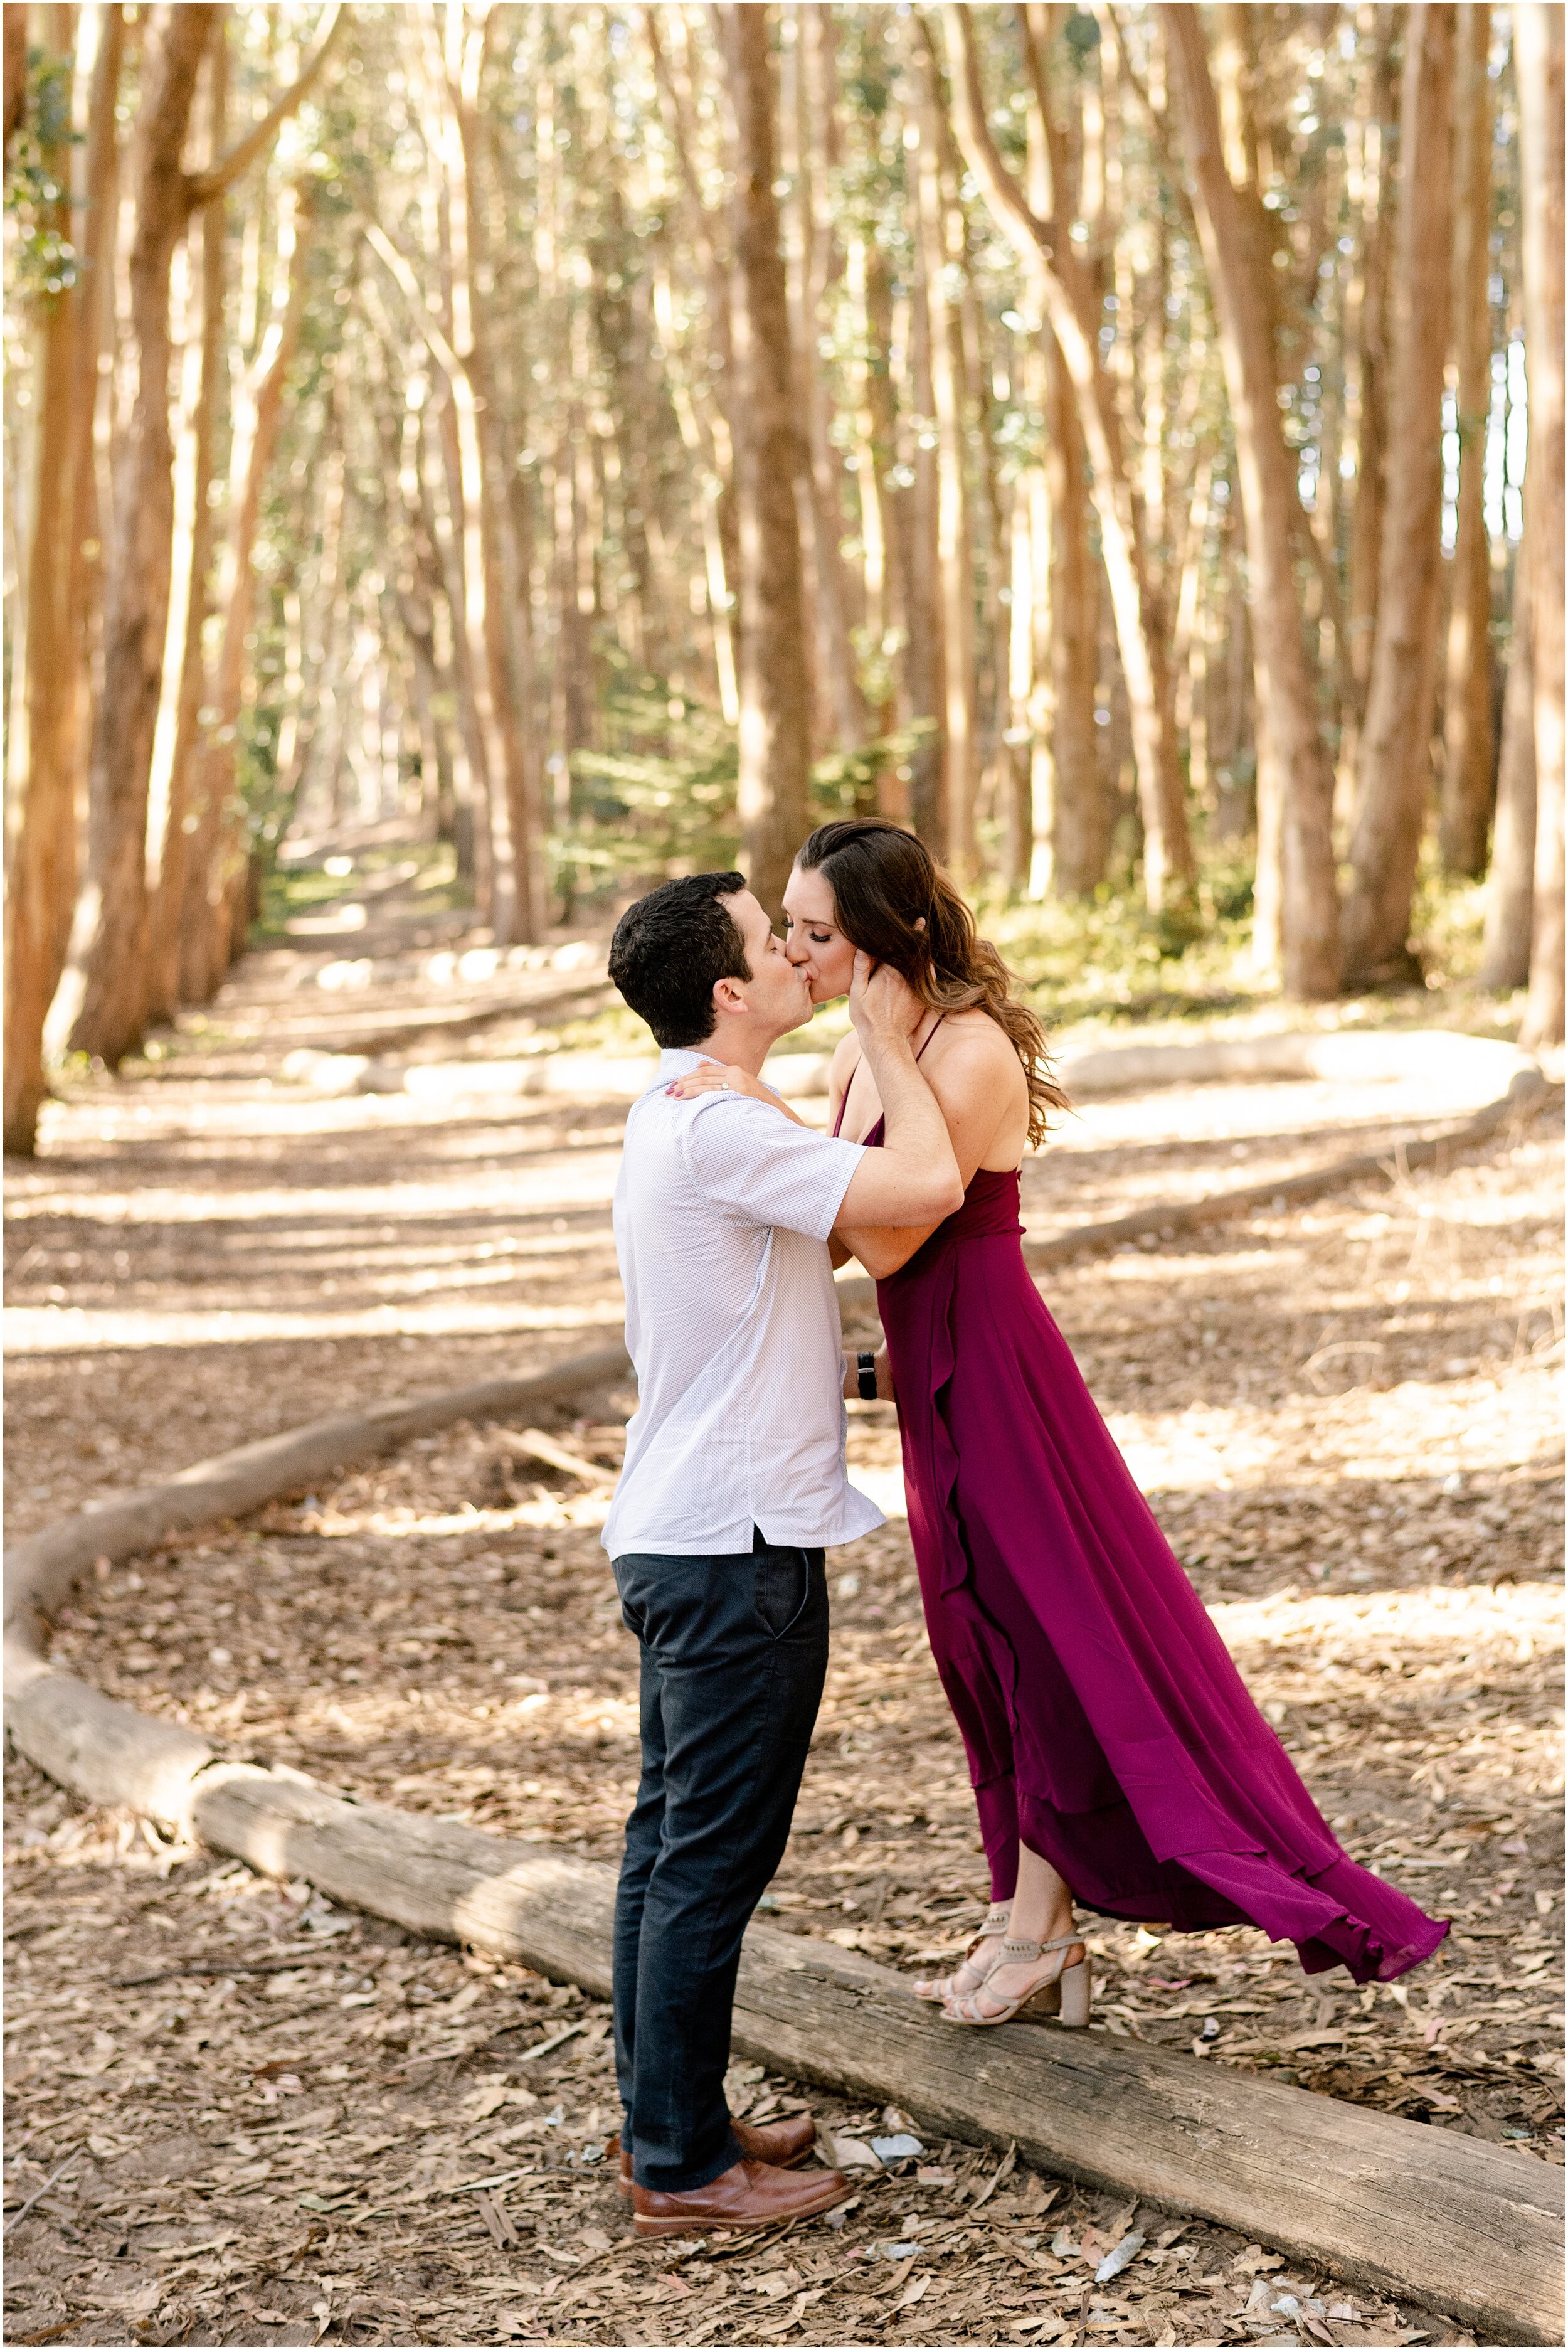 hannah leigh photography Baker Beach, Lovers Lane. Palace of Fine Arts Engagement Session San Franscico, CA_4831.jpg